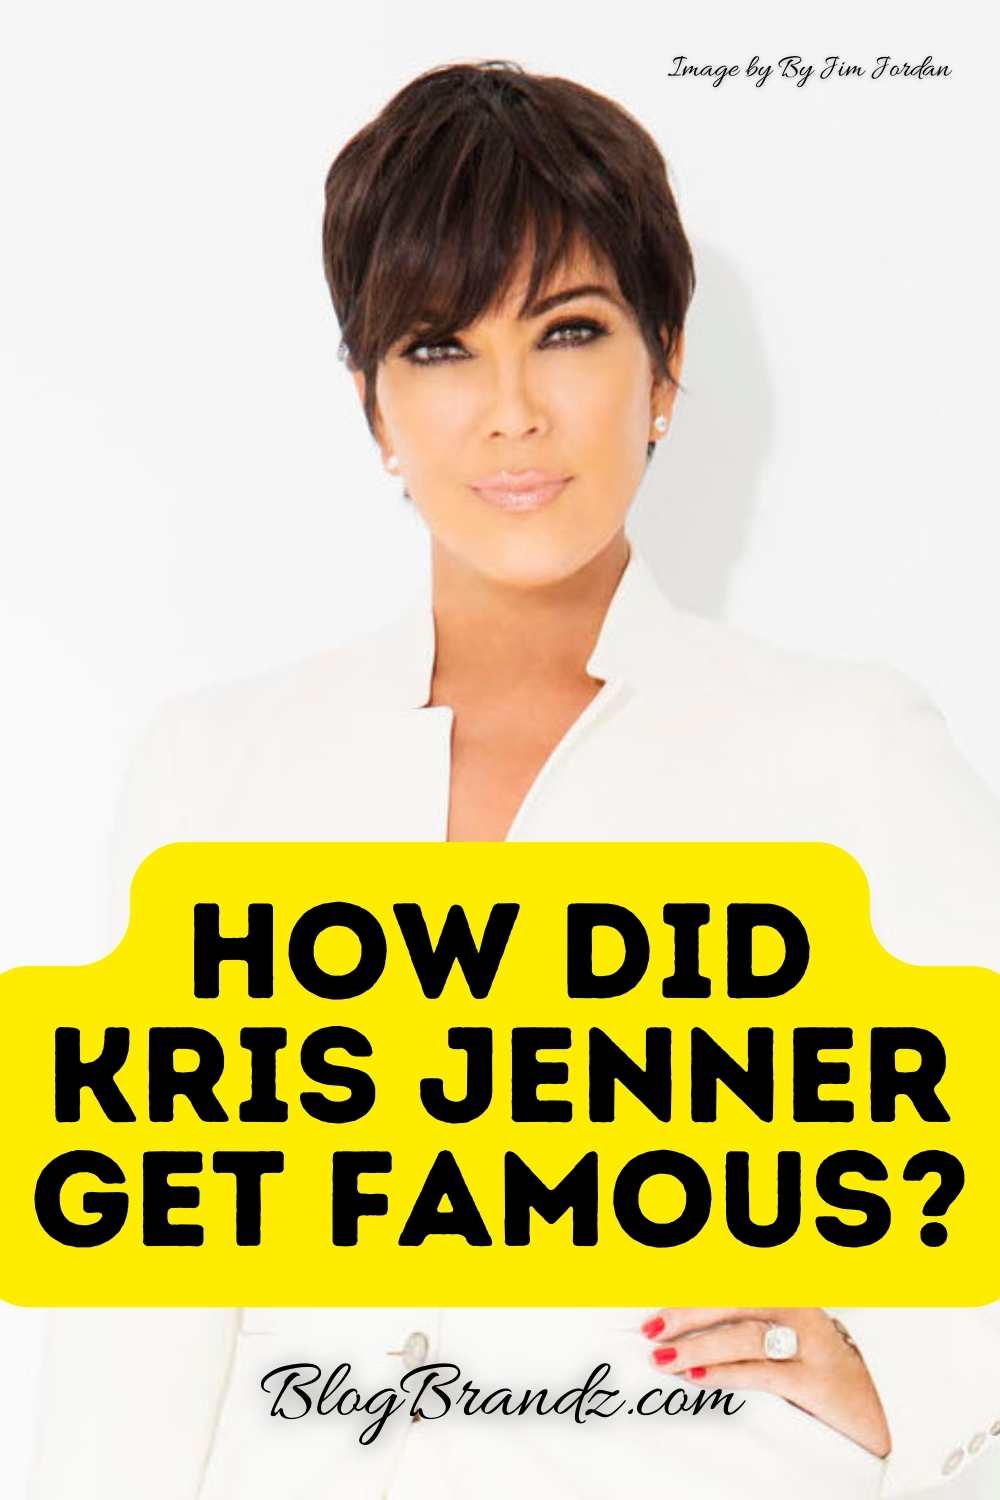 How Did Kris Jenner Get Famous